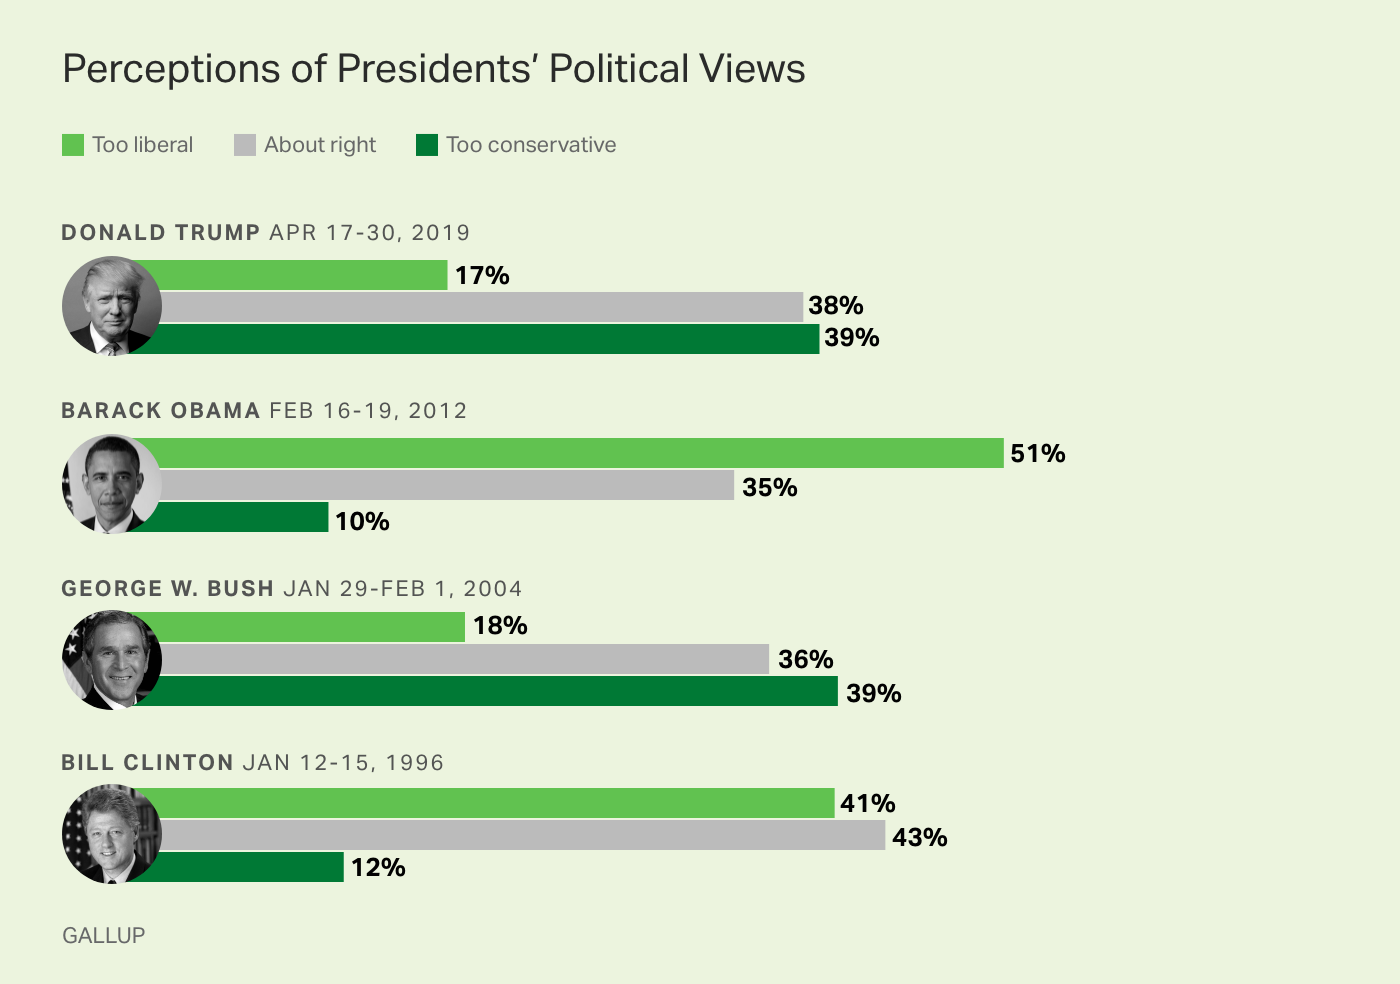 Americans' view Donald Trump's political views as similar to those of George W. Bush.